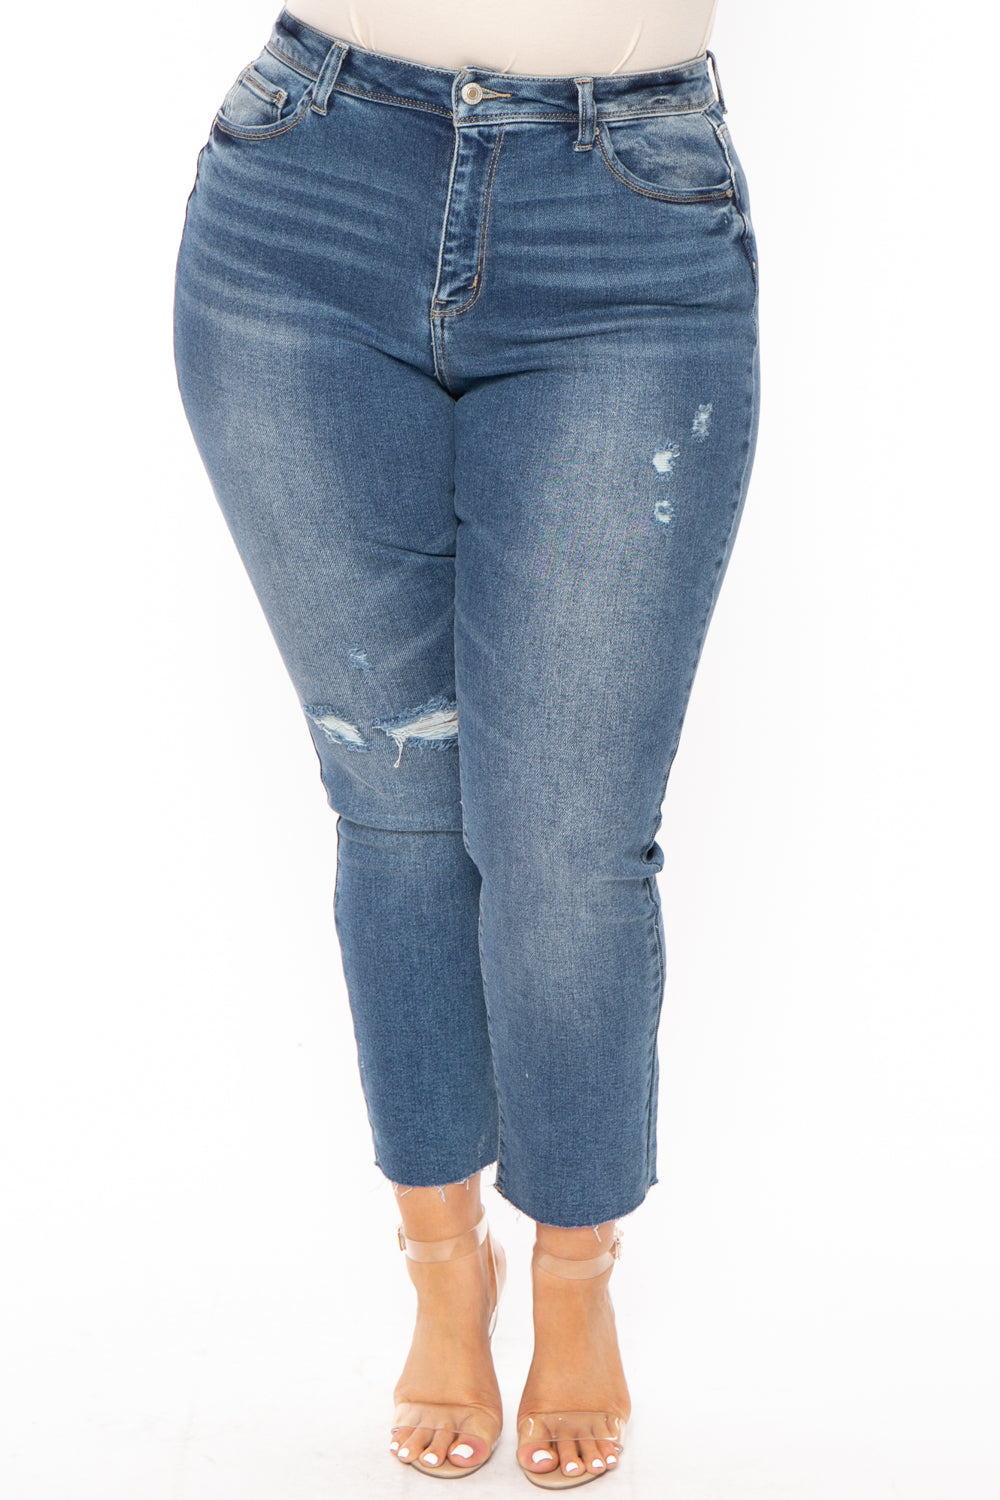 Buy Infinite Fit High Rise Straight Leg Jeans Plus Size for USD 44.00